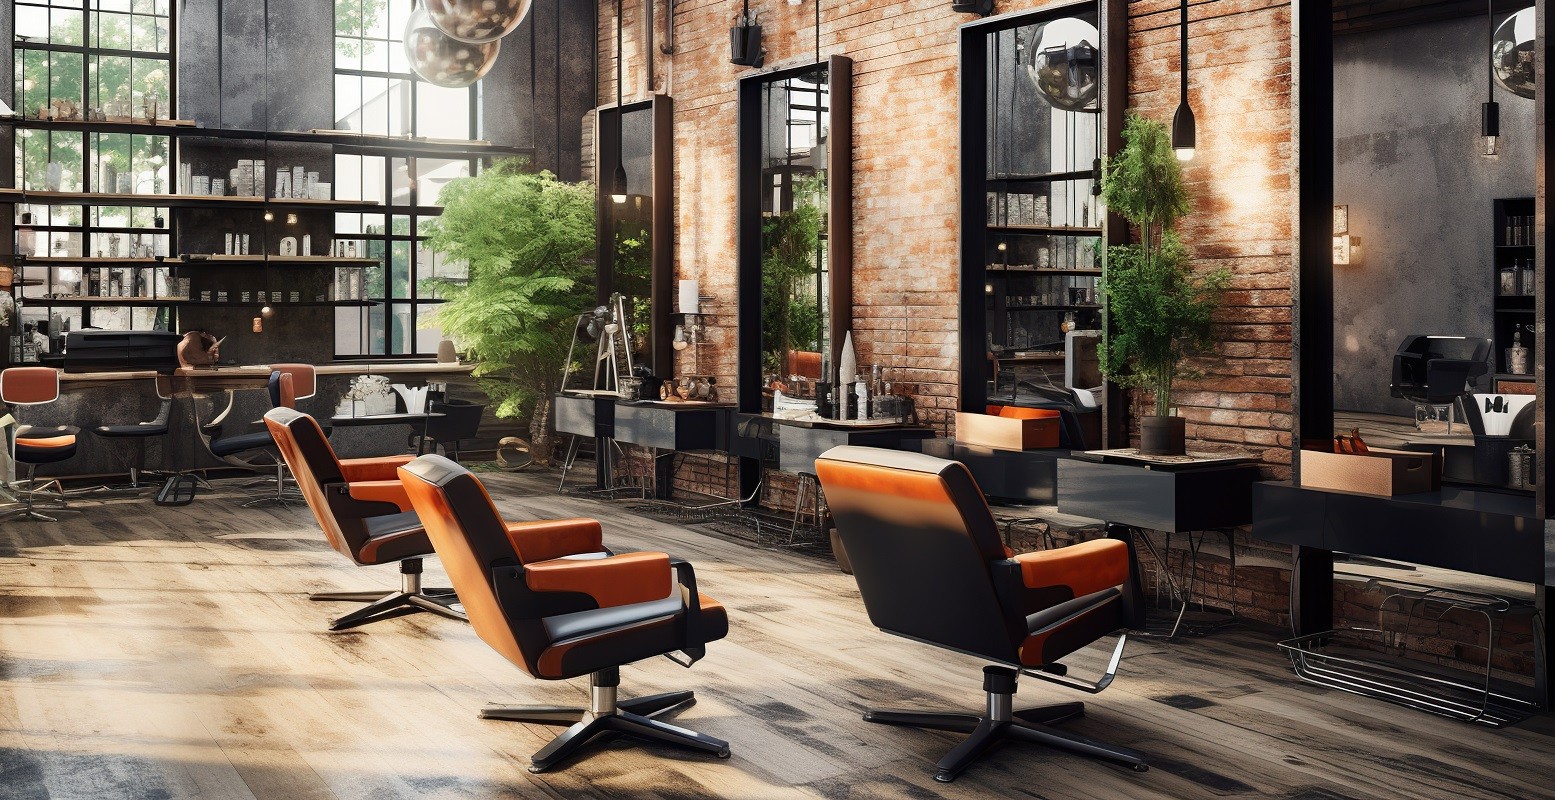 What Equipment Should be Included When Selling a Salon